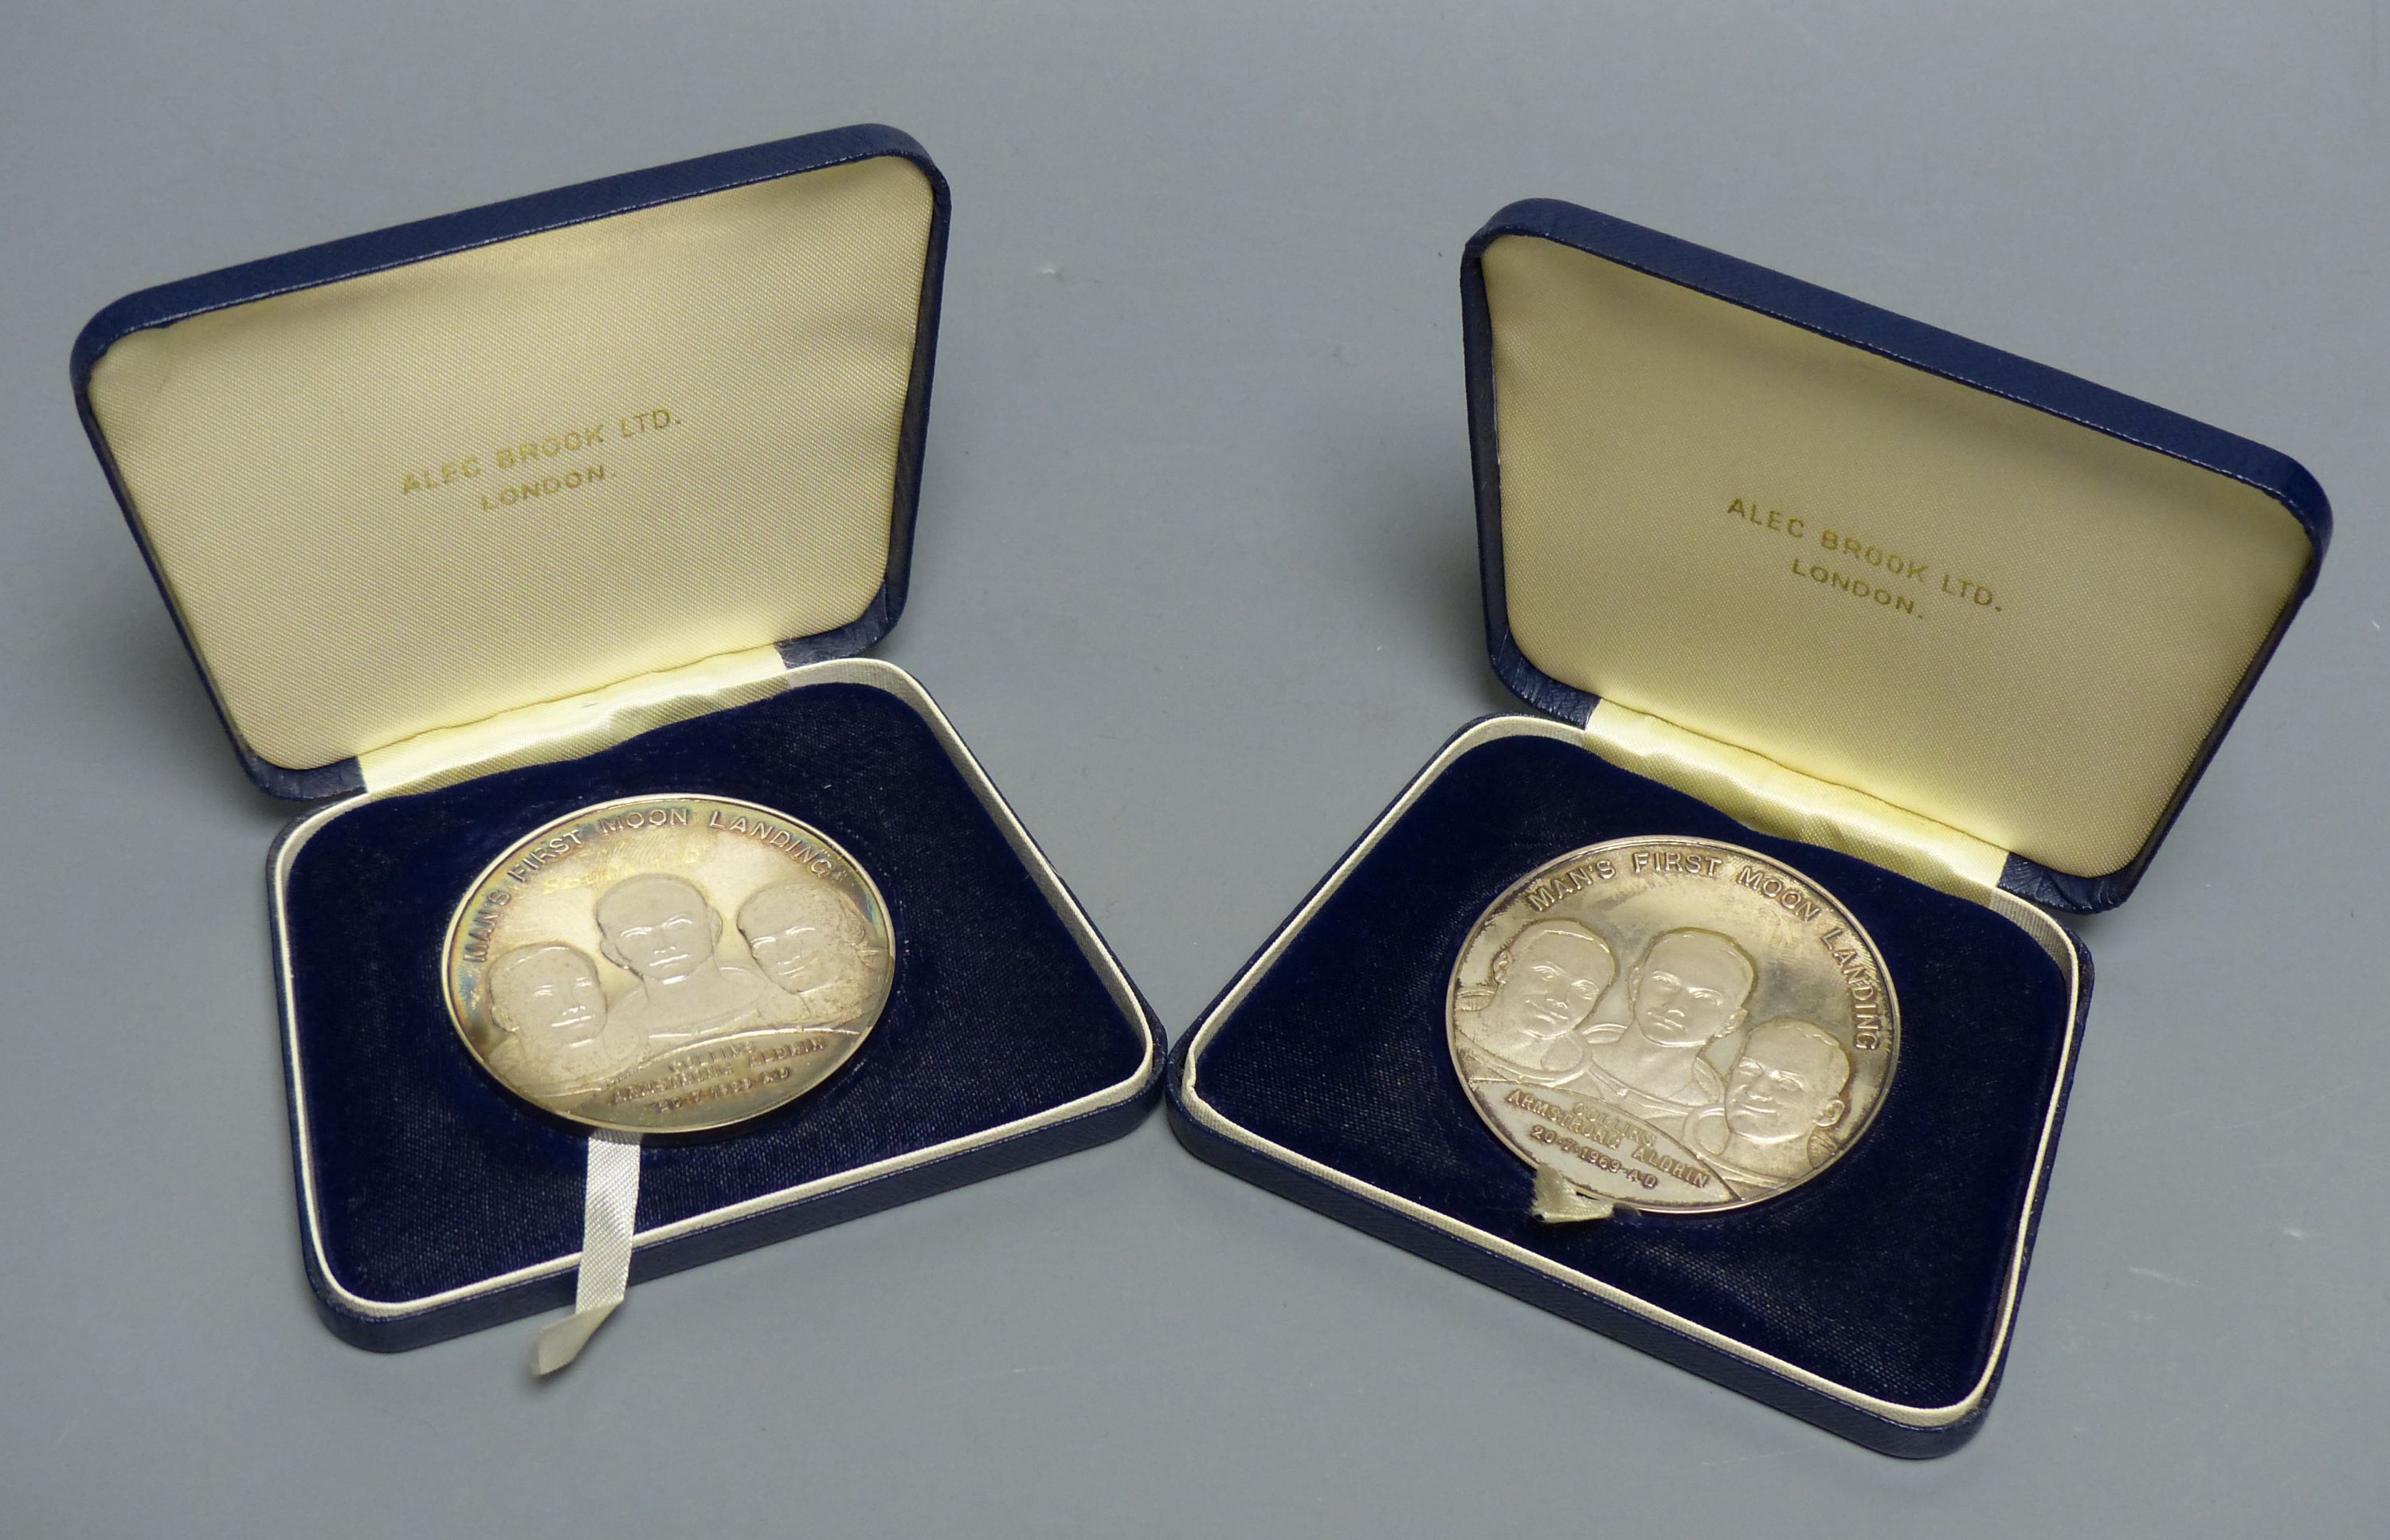 Two sterling silver limited edition 'Man's First Moon Landing' commemorative medals, cased